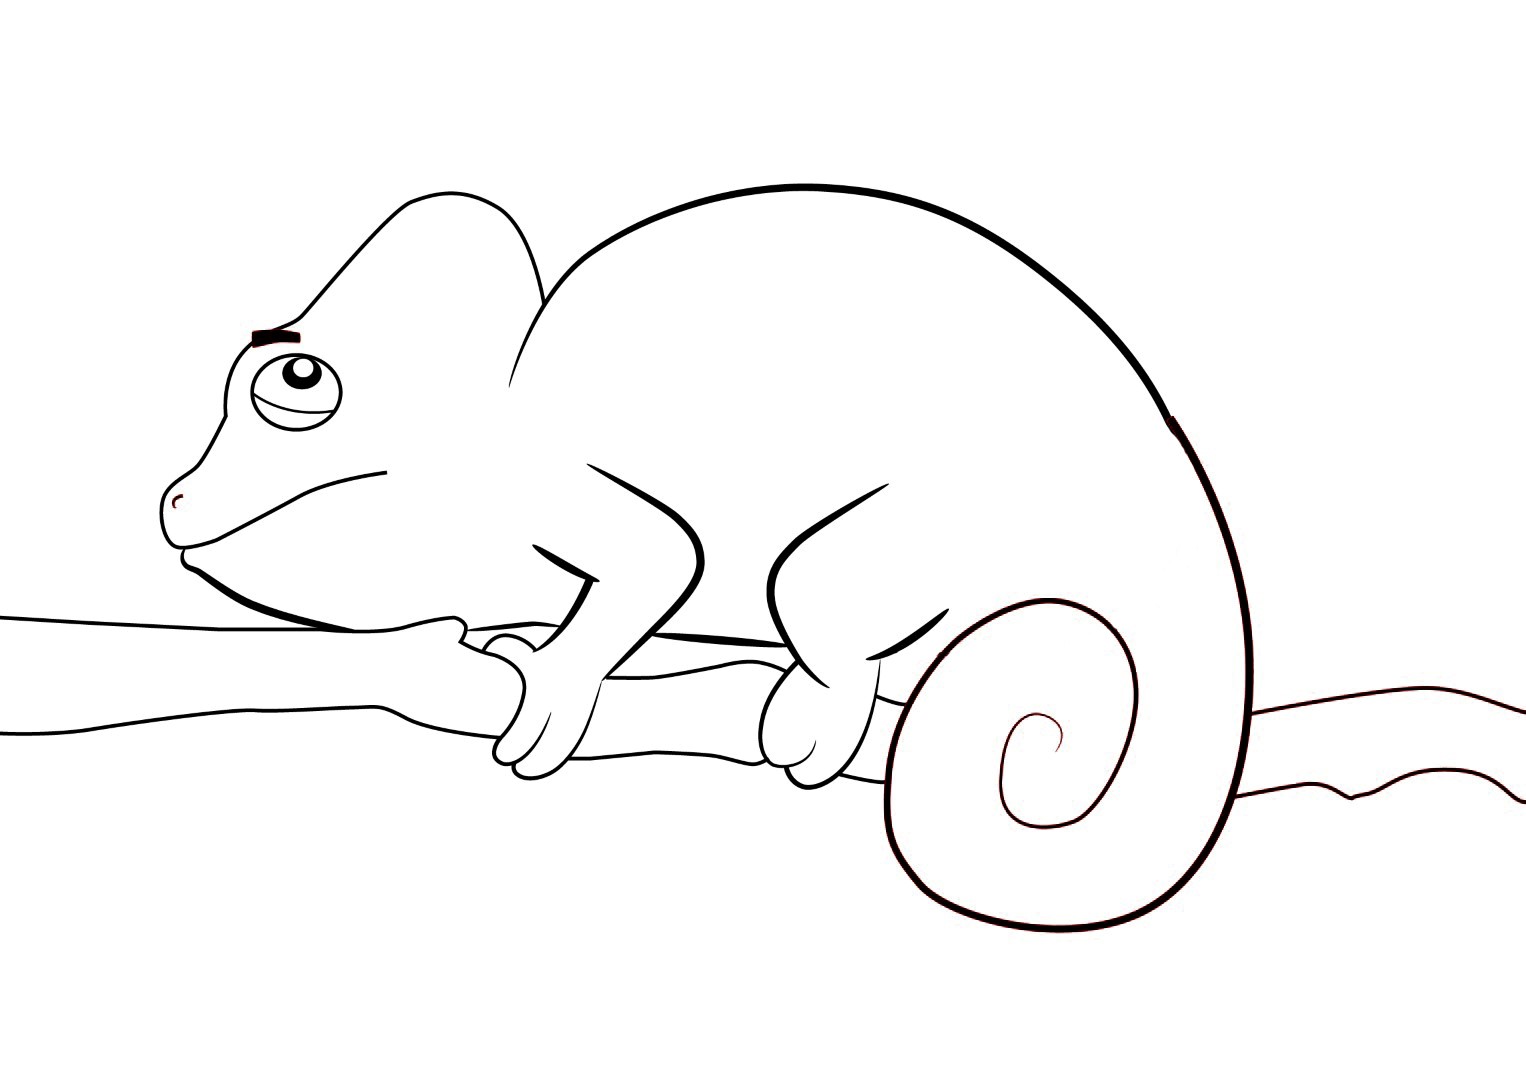 Chameleon Coloring Pages Best Coloring Pages For Kids